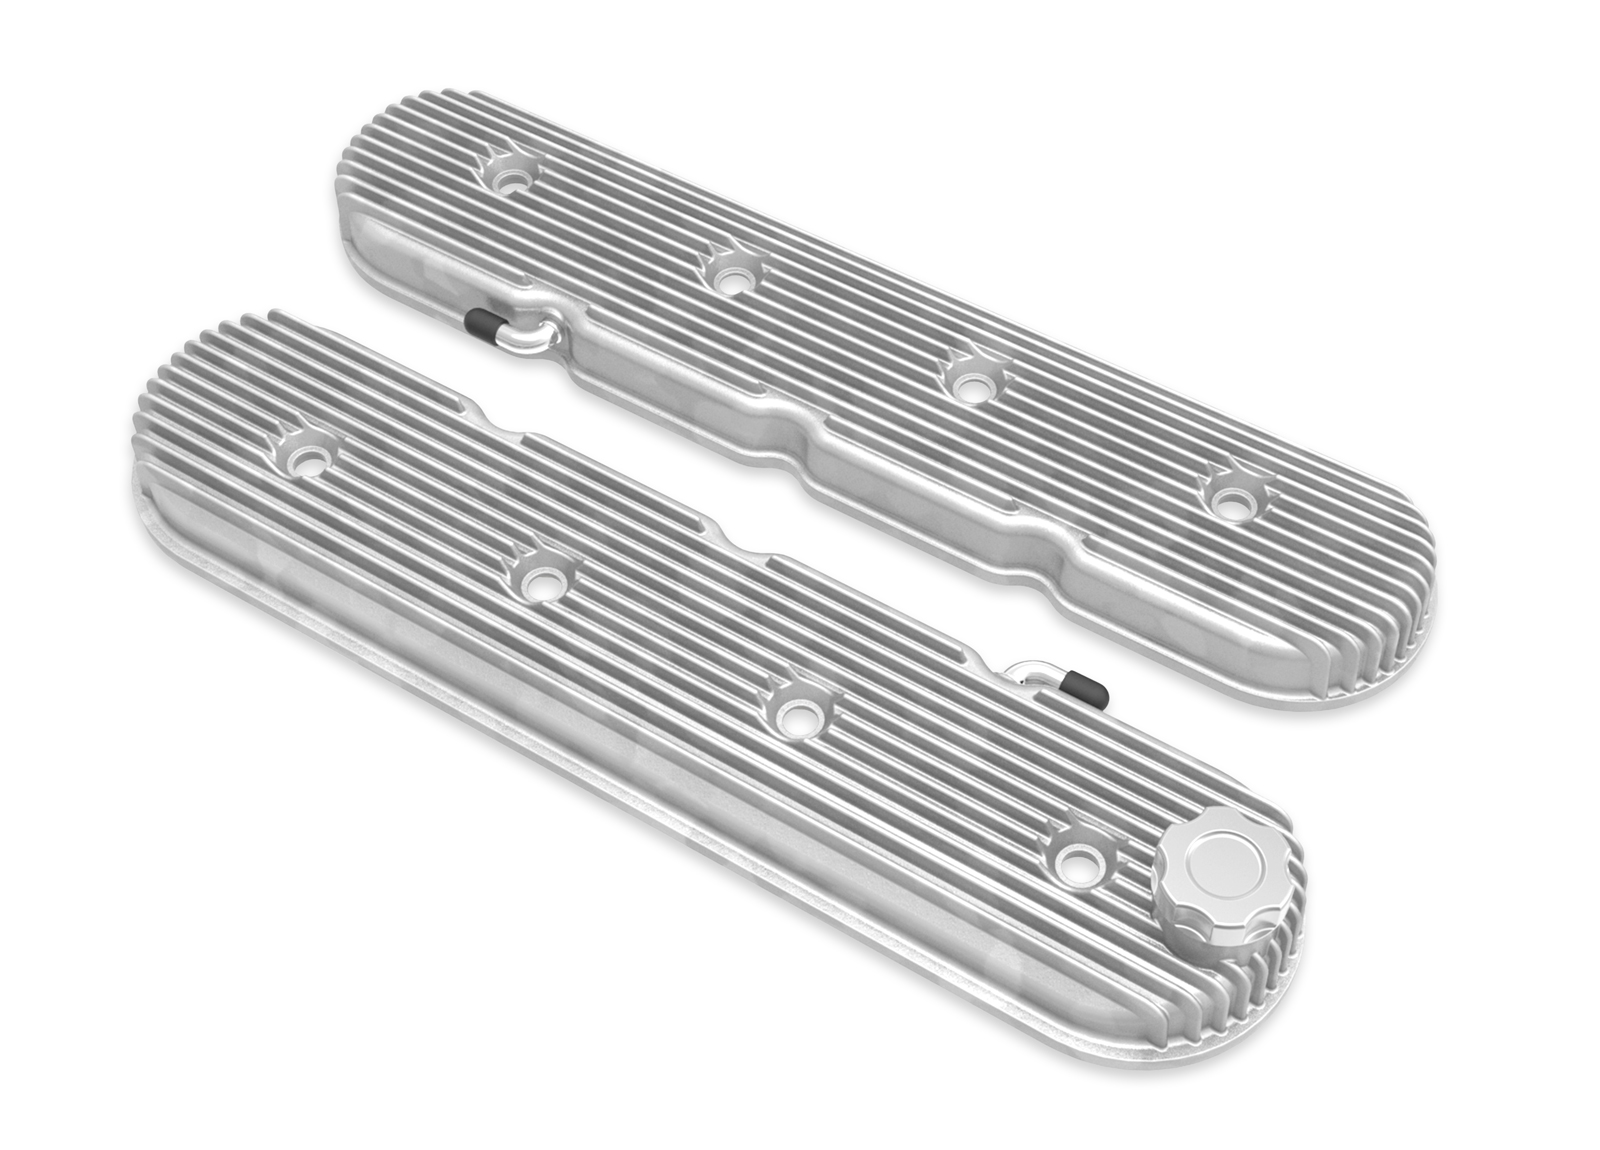 LS1/LS2/LS3/LS6/LS7 Holley Vintage Series Finned Valve Covers - Natural Cast